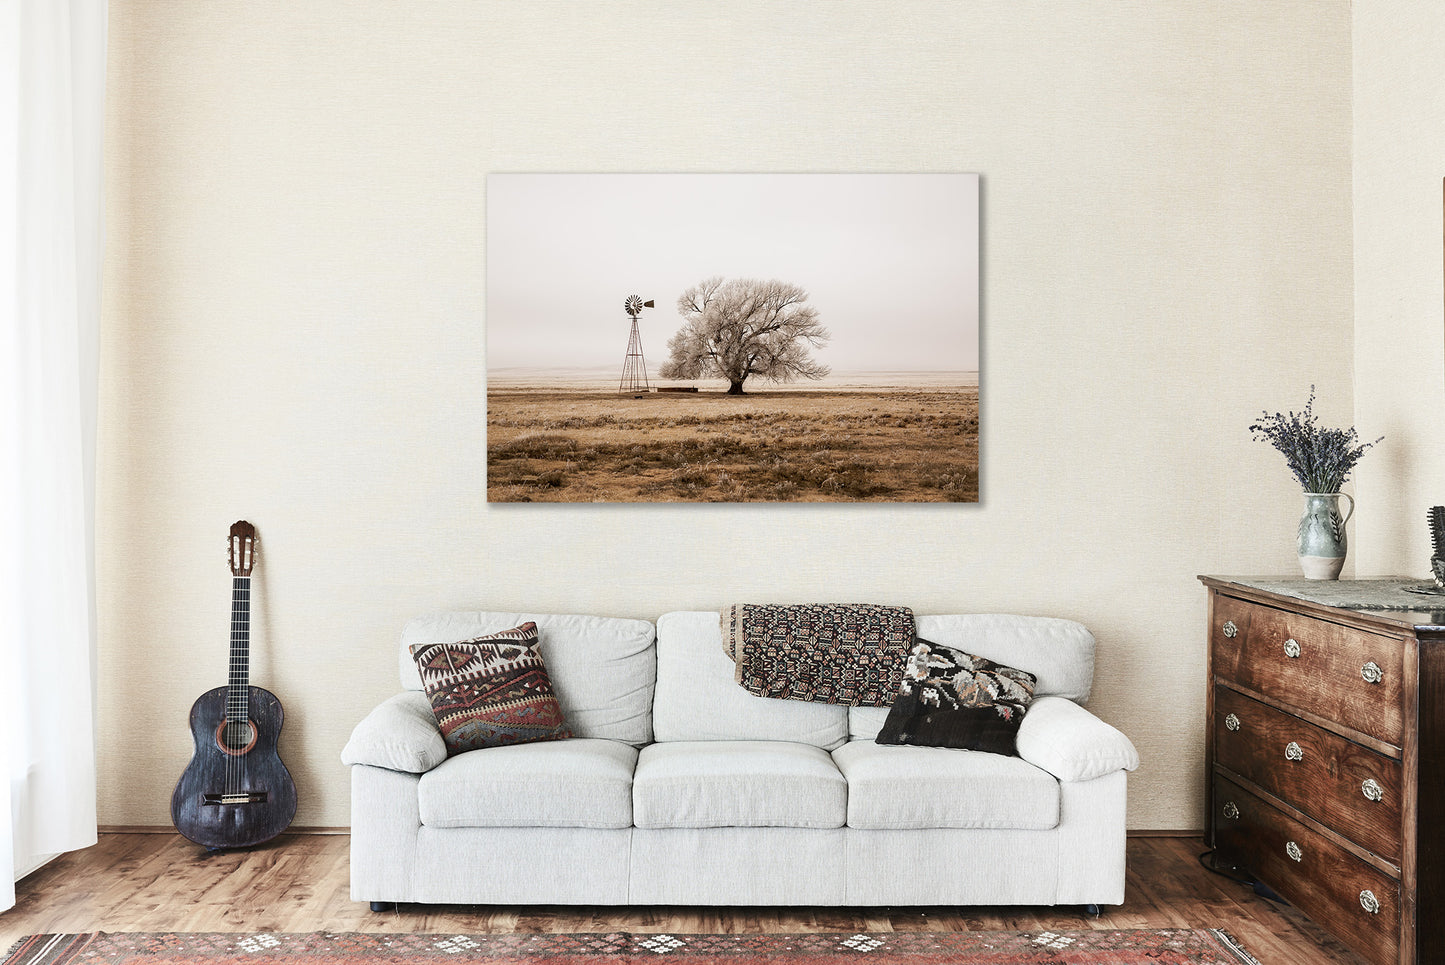 Country Wall Art - Gallery Wrapped Canvas of Old Windmill and Tree Covered in Frost on Winter Day in New Mexico - Farmhouse Photography